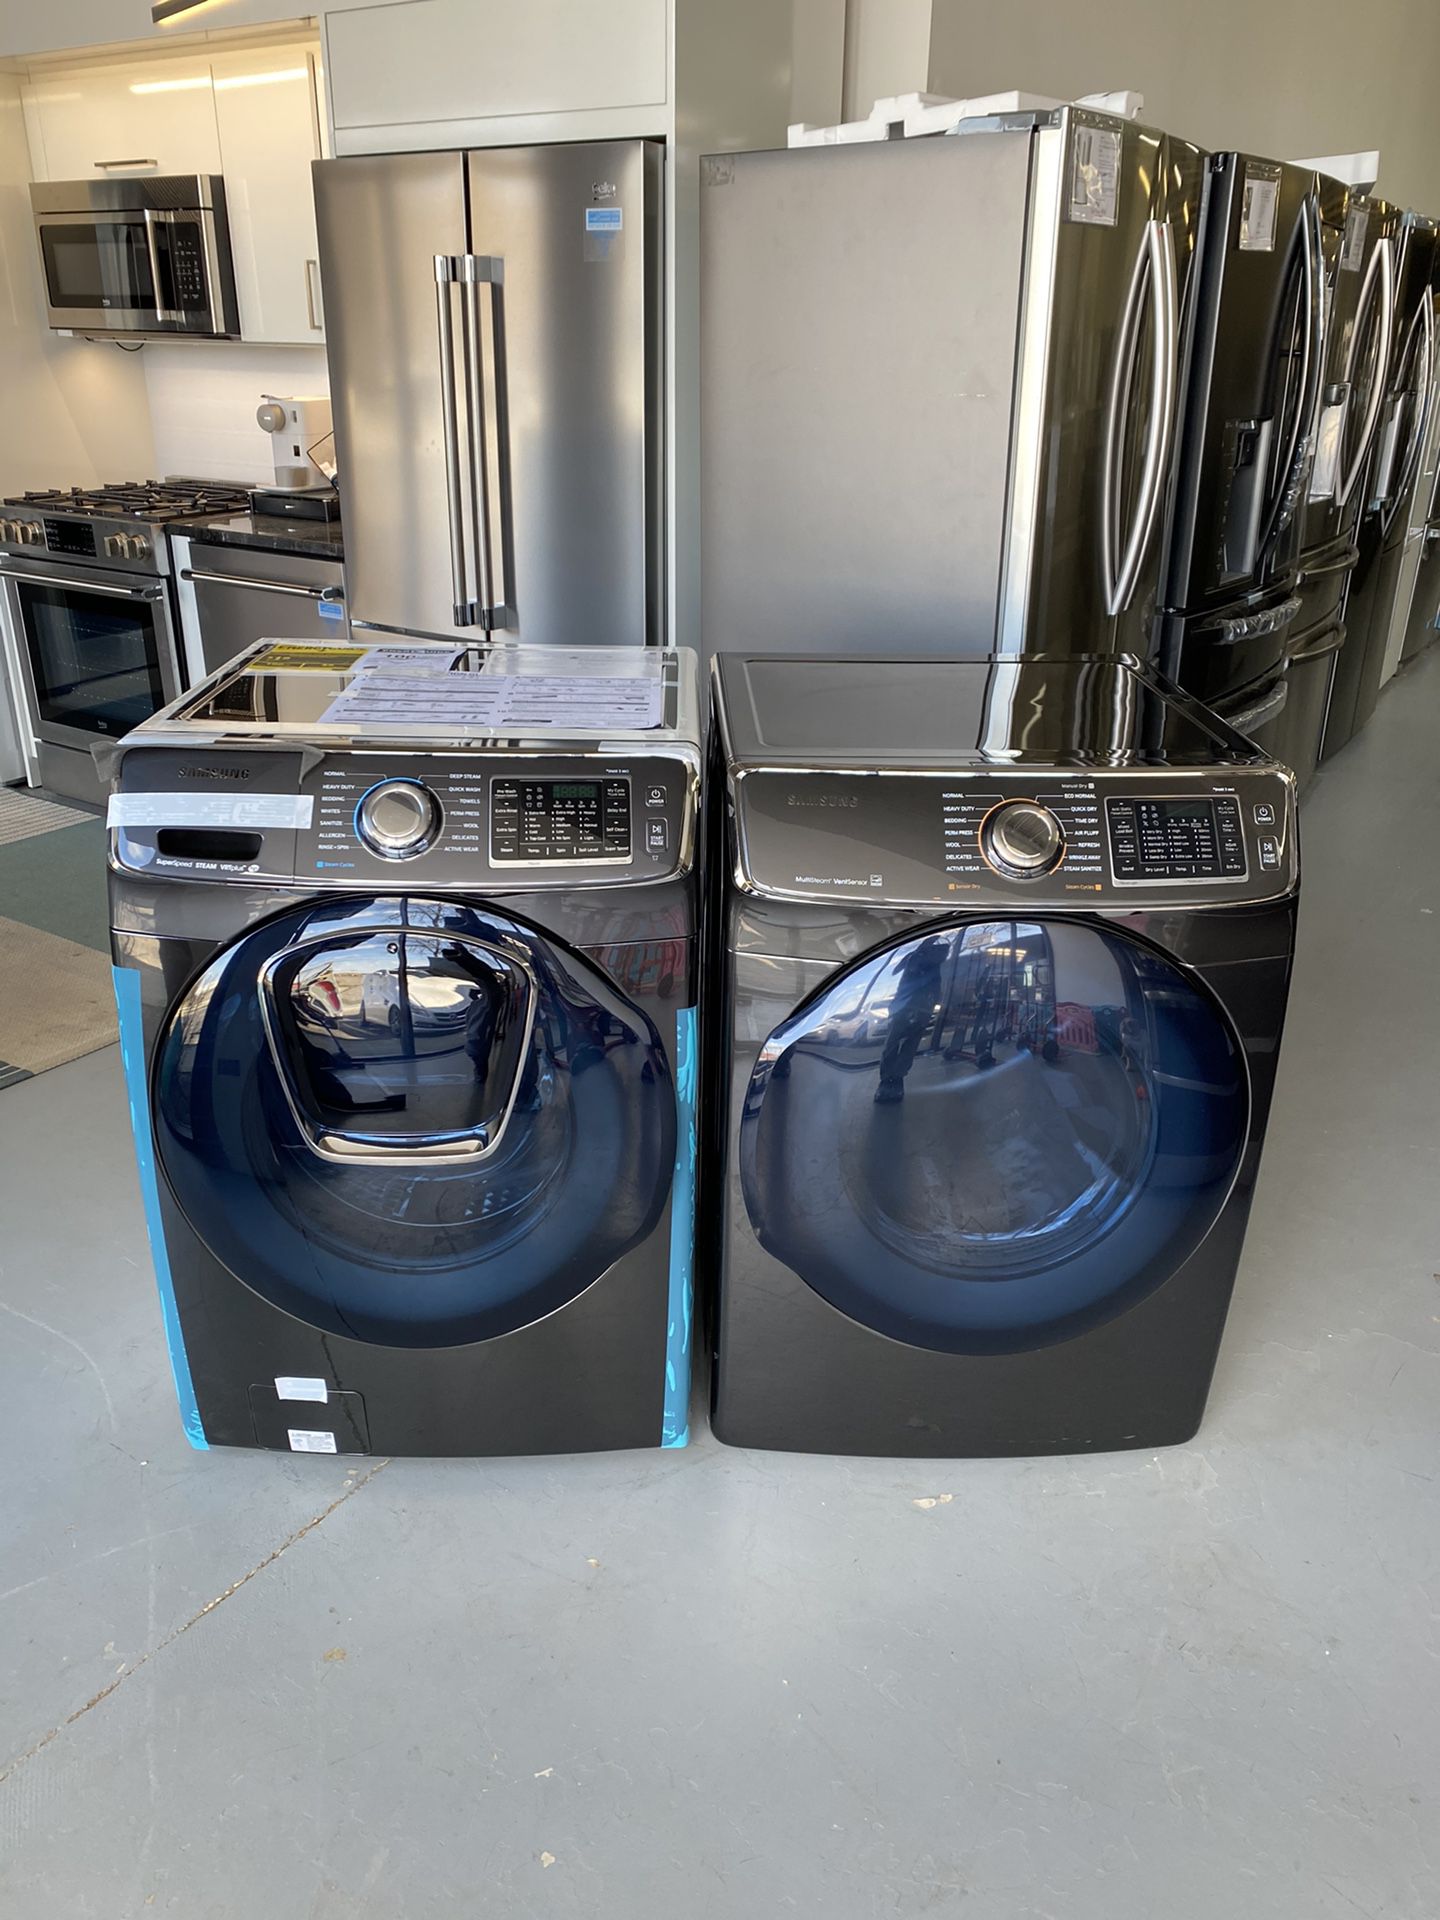 NEW Samsung front loading washer and electric dryer set!